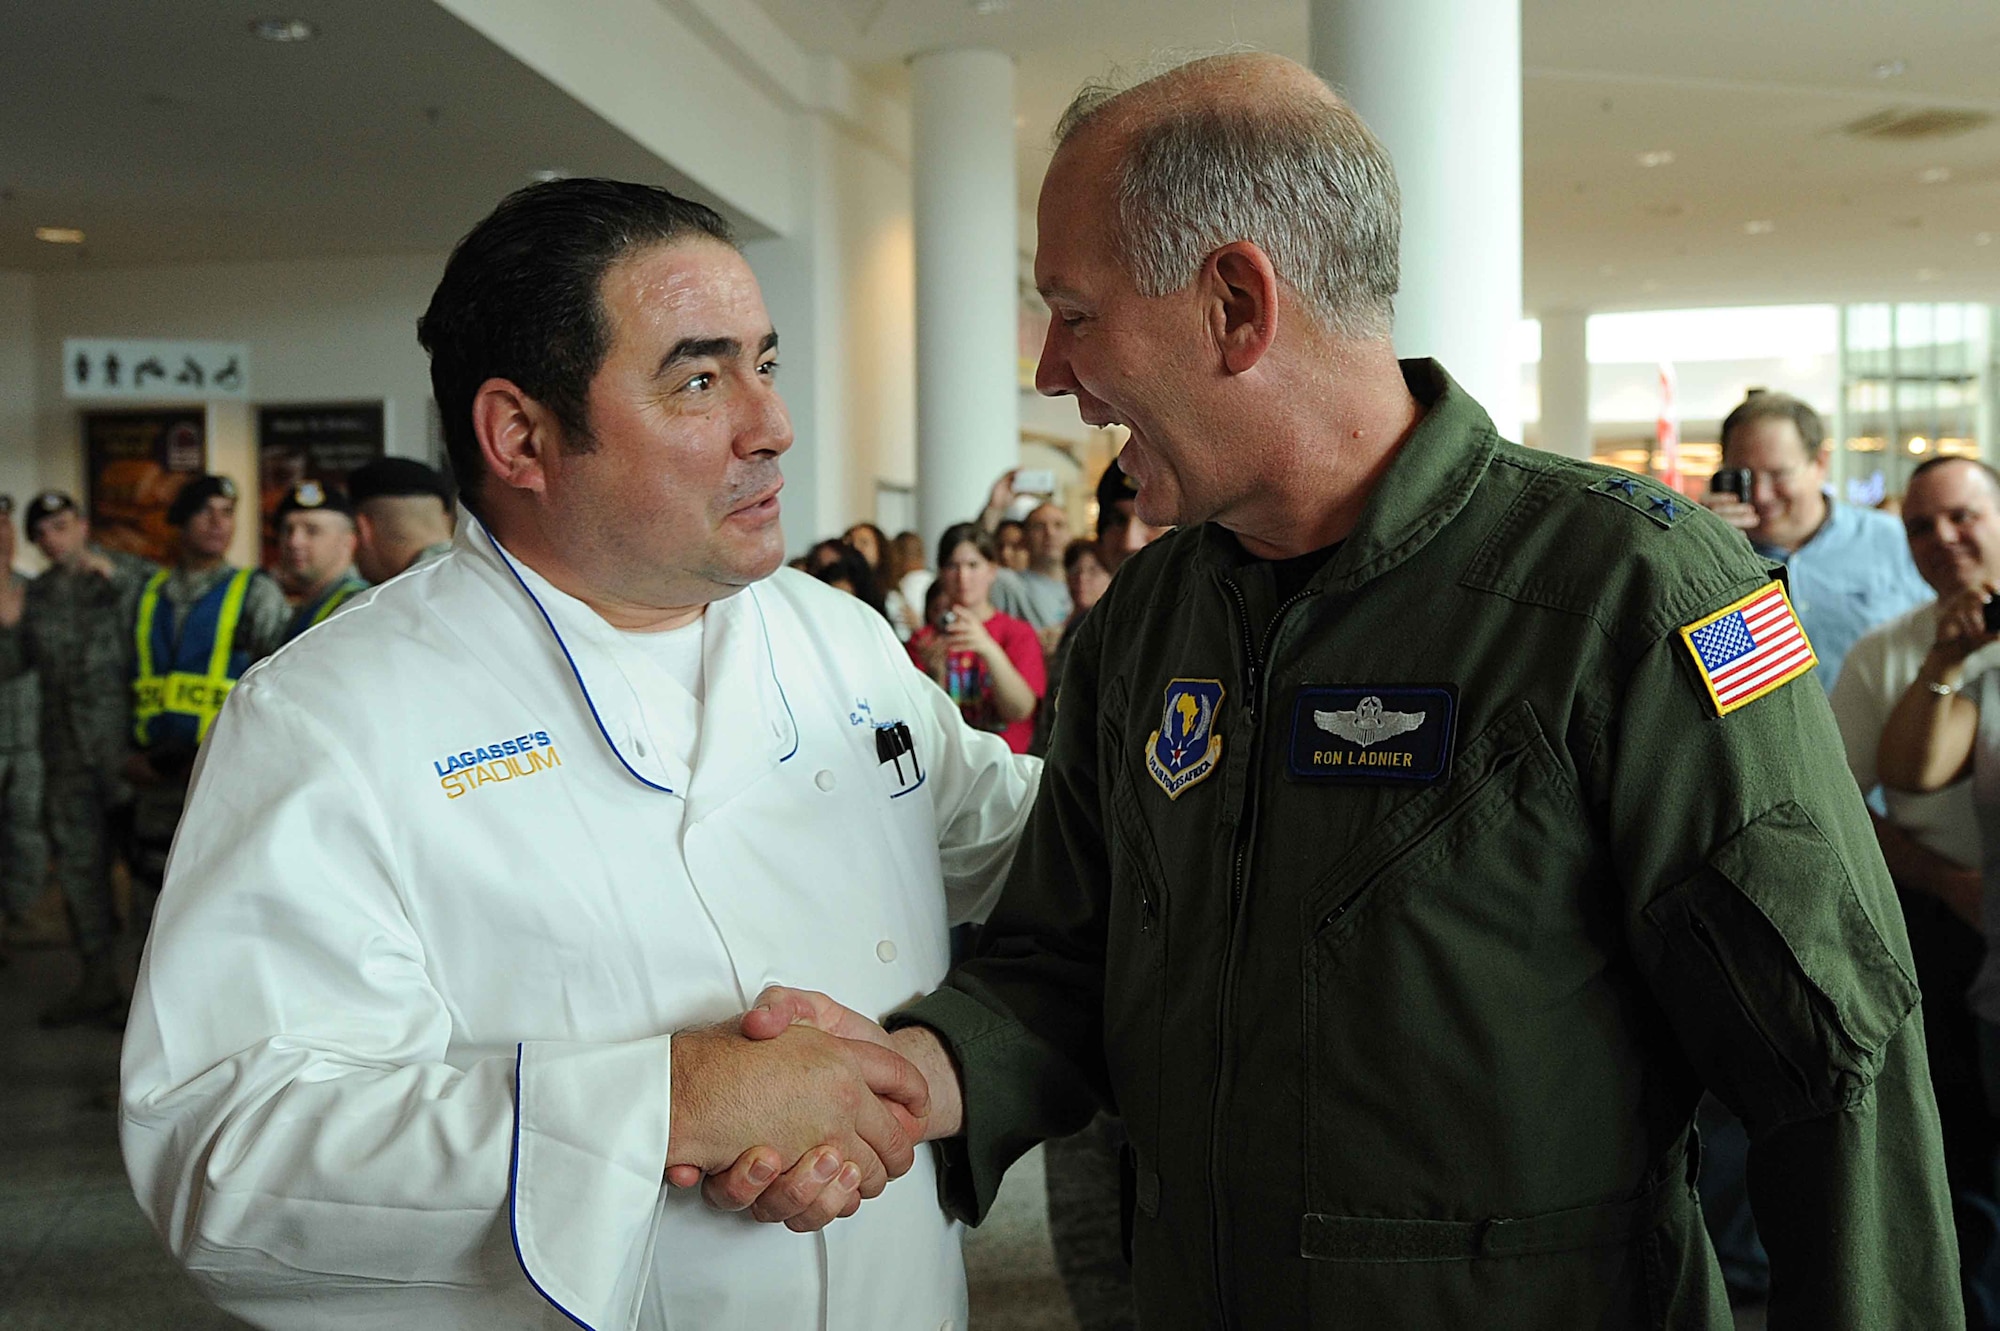 Celebrity Chef Emeril Lagasse greets Maj. Gen. Ronald R. "Ron" Ladnier, 17th Air Force and U.S. Air Forces Africa commander, at the Kaiserslautern Military Community Center, Ramstein Air Base, Germany, May 29, 2010. Celebrity Chef Emeril Lagasse visited military family members at the KMCC by signing copies of his new book and performing an hour long cooking demonstration for over a thousand visitors. (U.S. Air Force photo by Staff Sgt. Stephen J. Otero)